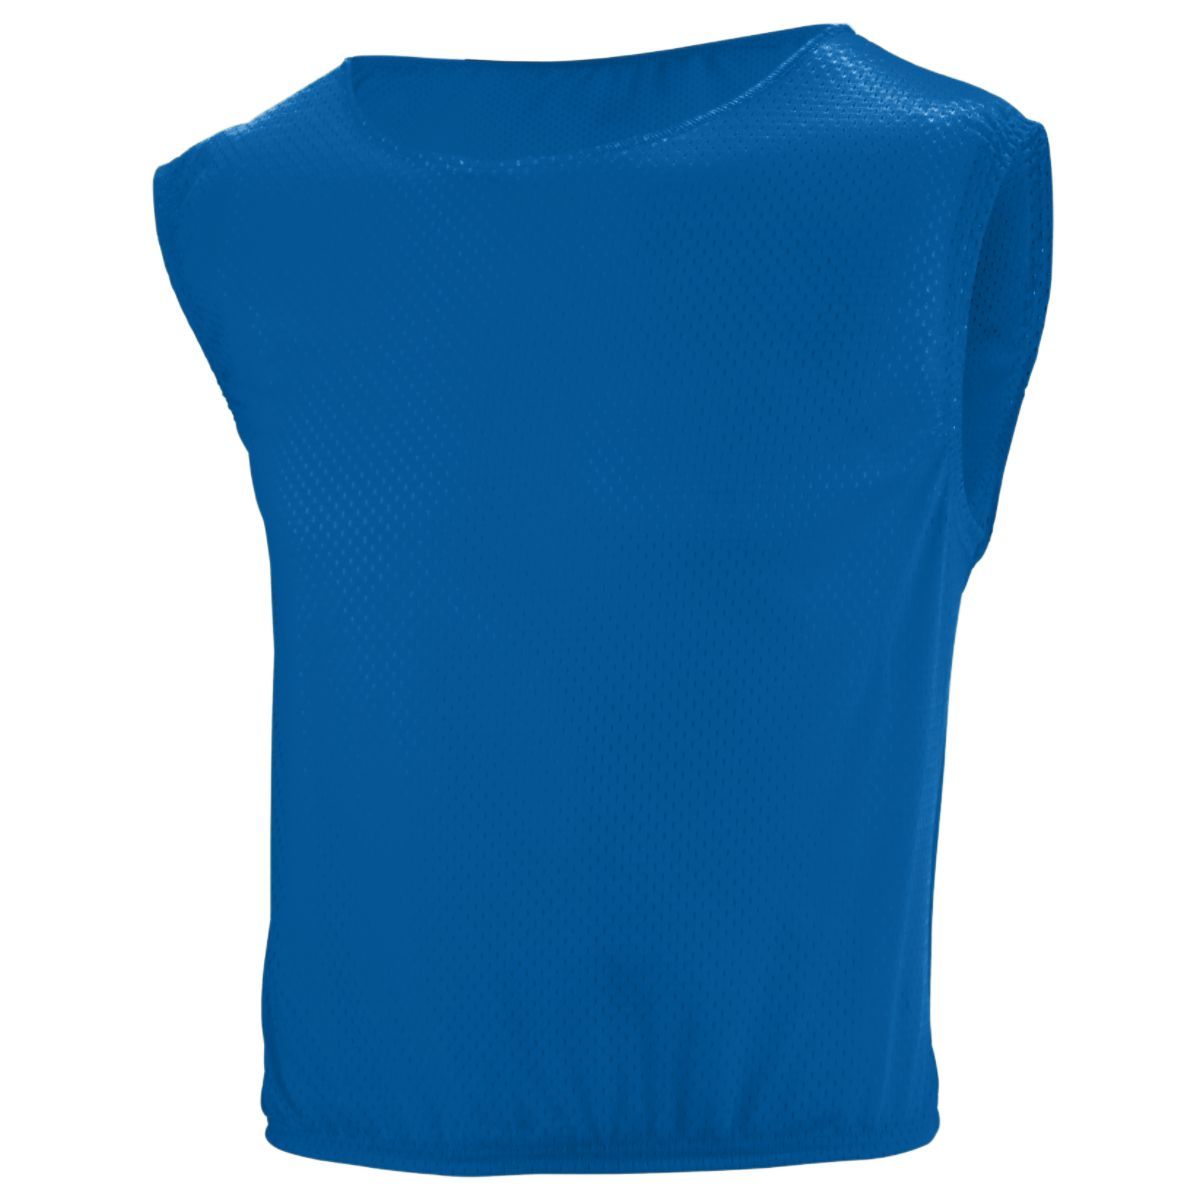 Augusta Sportswear Scrimmage Vest in Royal  -Part of the Adult, Augusta-Products, Football, Outerwear, All-Sports, All-Sports-1 product lines at KanaleyCreations.com